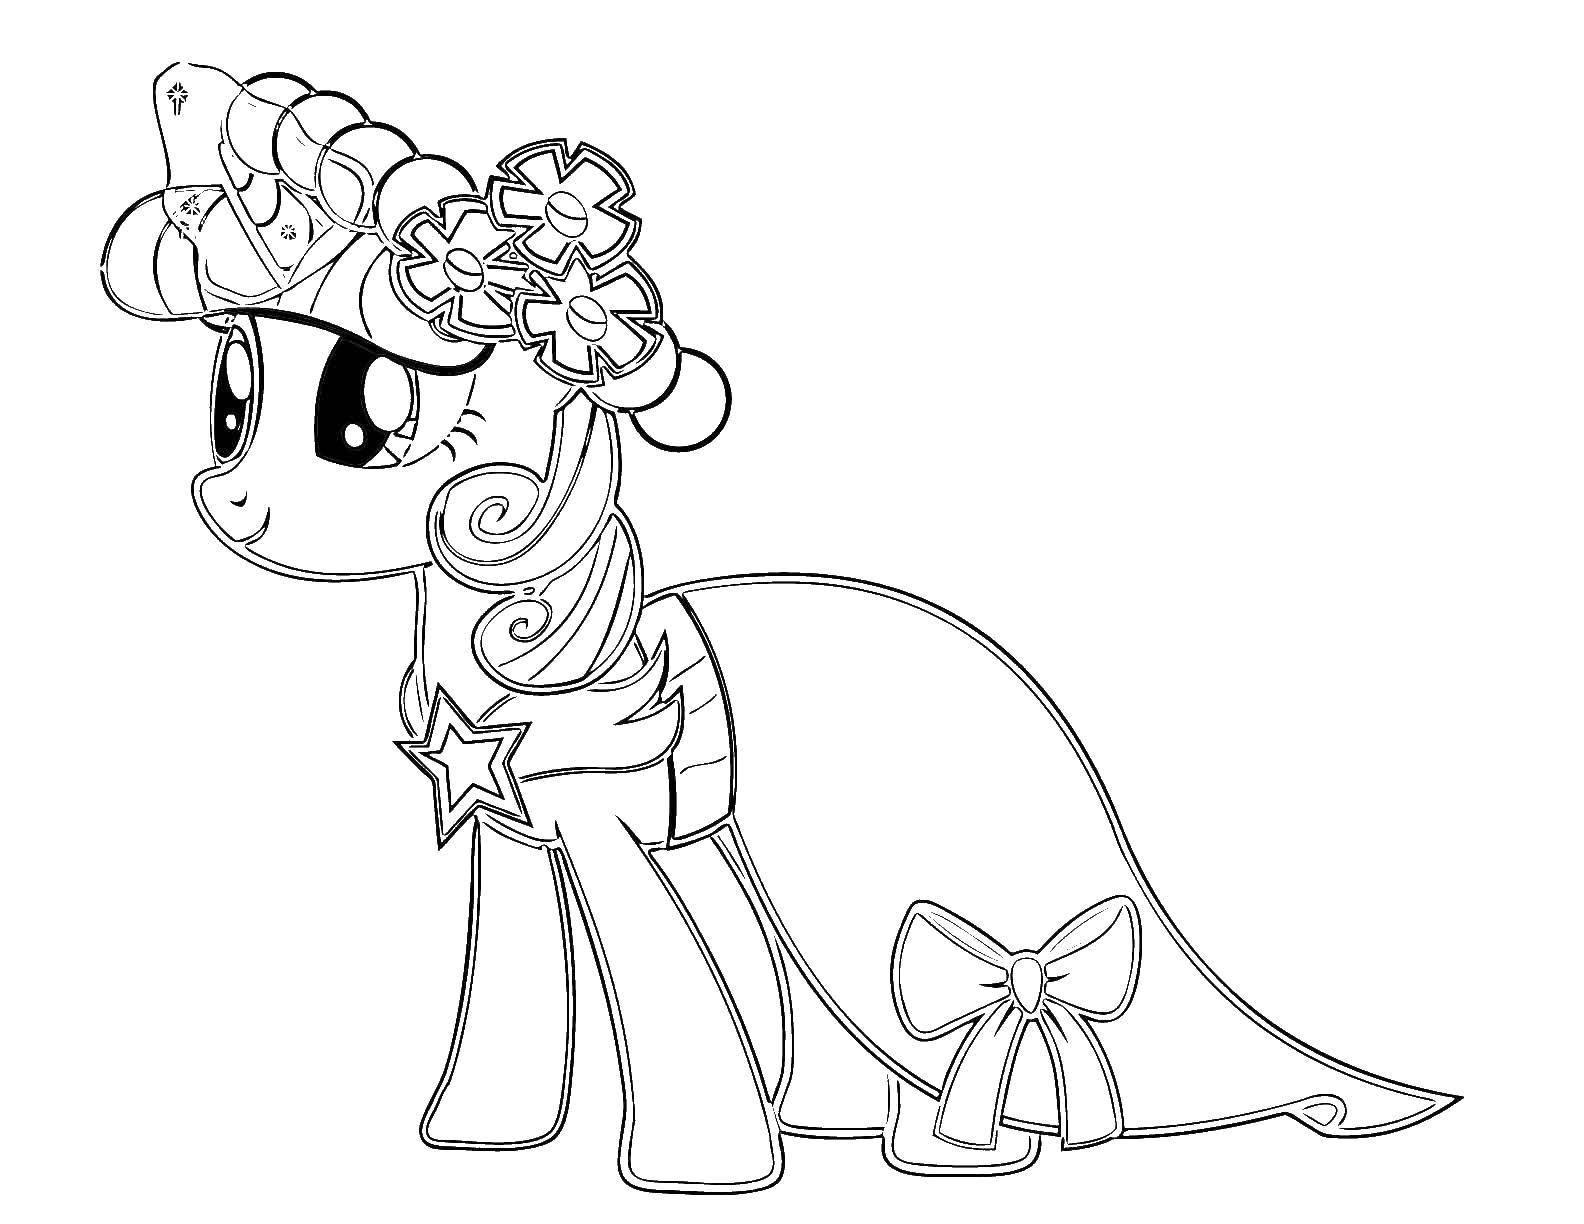 Coloring Poreska from my little pony . Category my little pony. Tags:  Pony, My little pony .